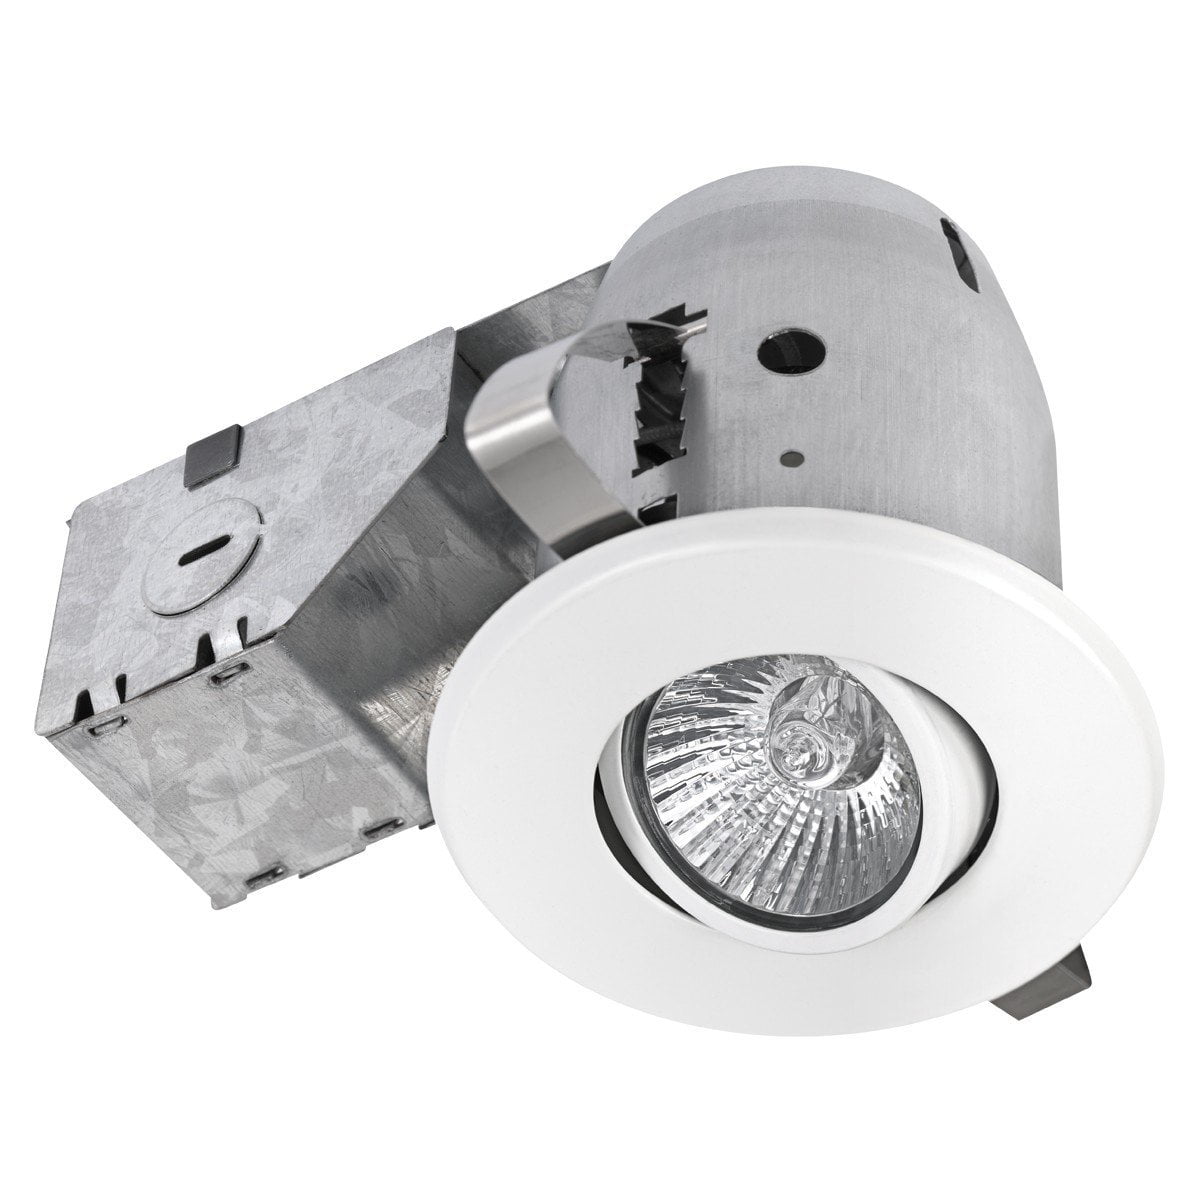 3" Dimmable Downlight Swivel Spotlight Recessed Lighting Kit IC Rated with LED